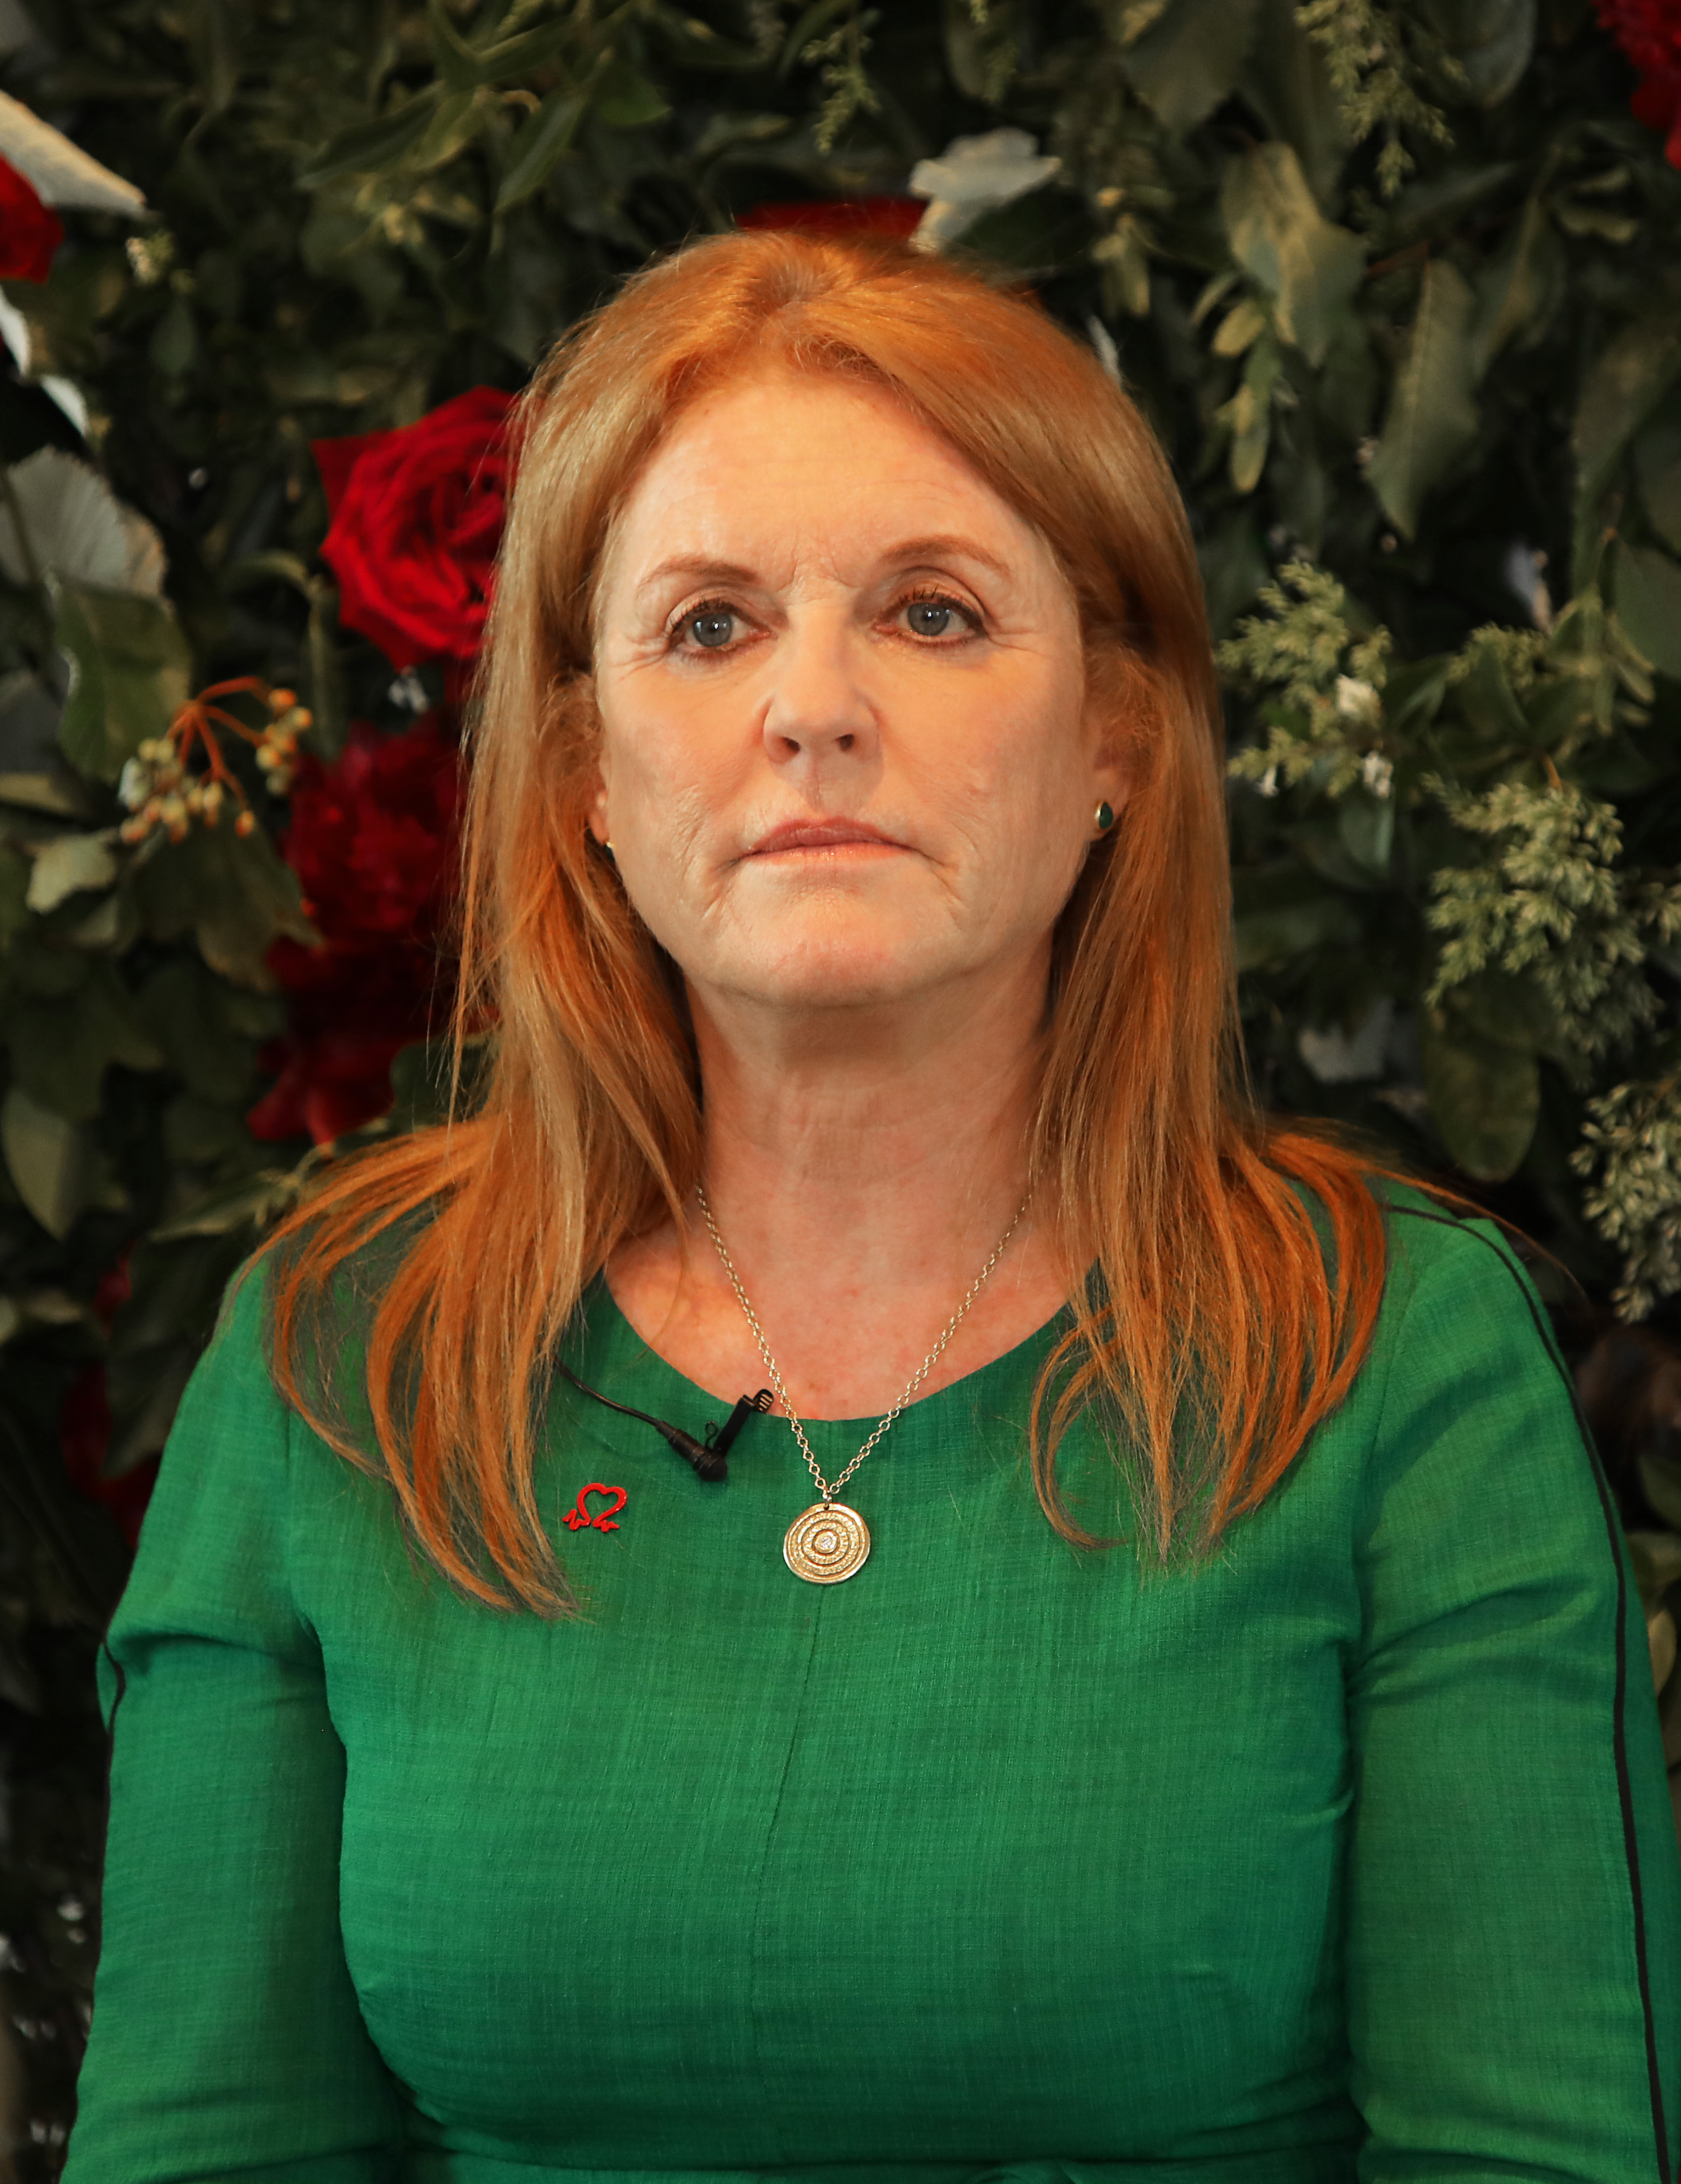 Sarah Ferguson, Duchess of York, at the British Heart Foundation's "Bias And Biology" panel on June 25, 2019, in London, England | Source: Getty Images